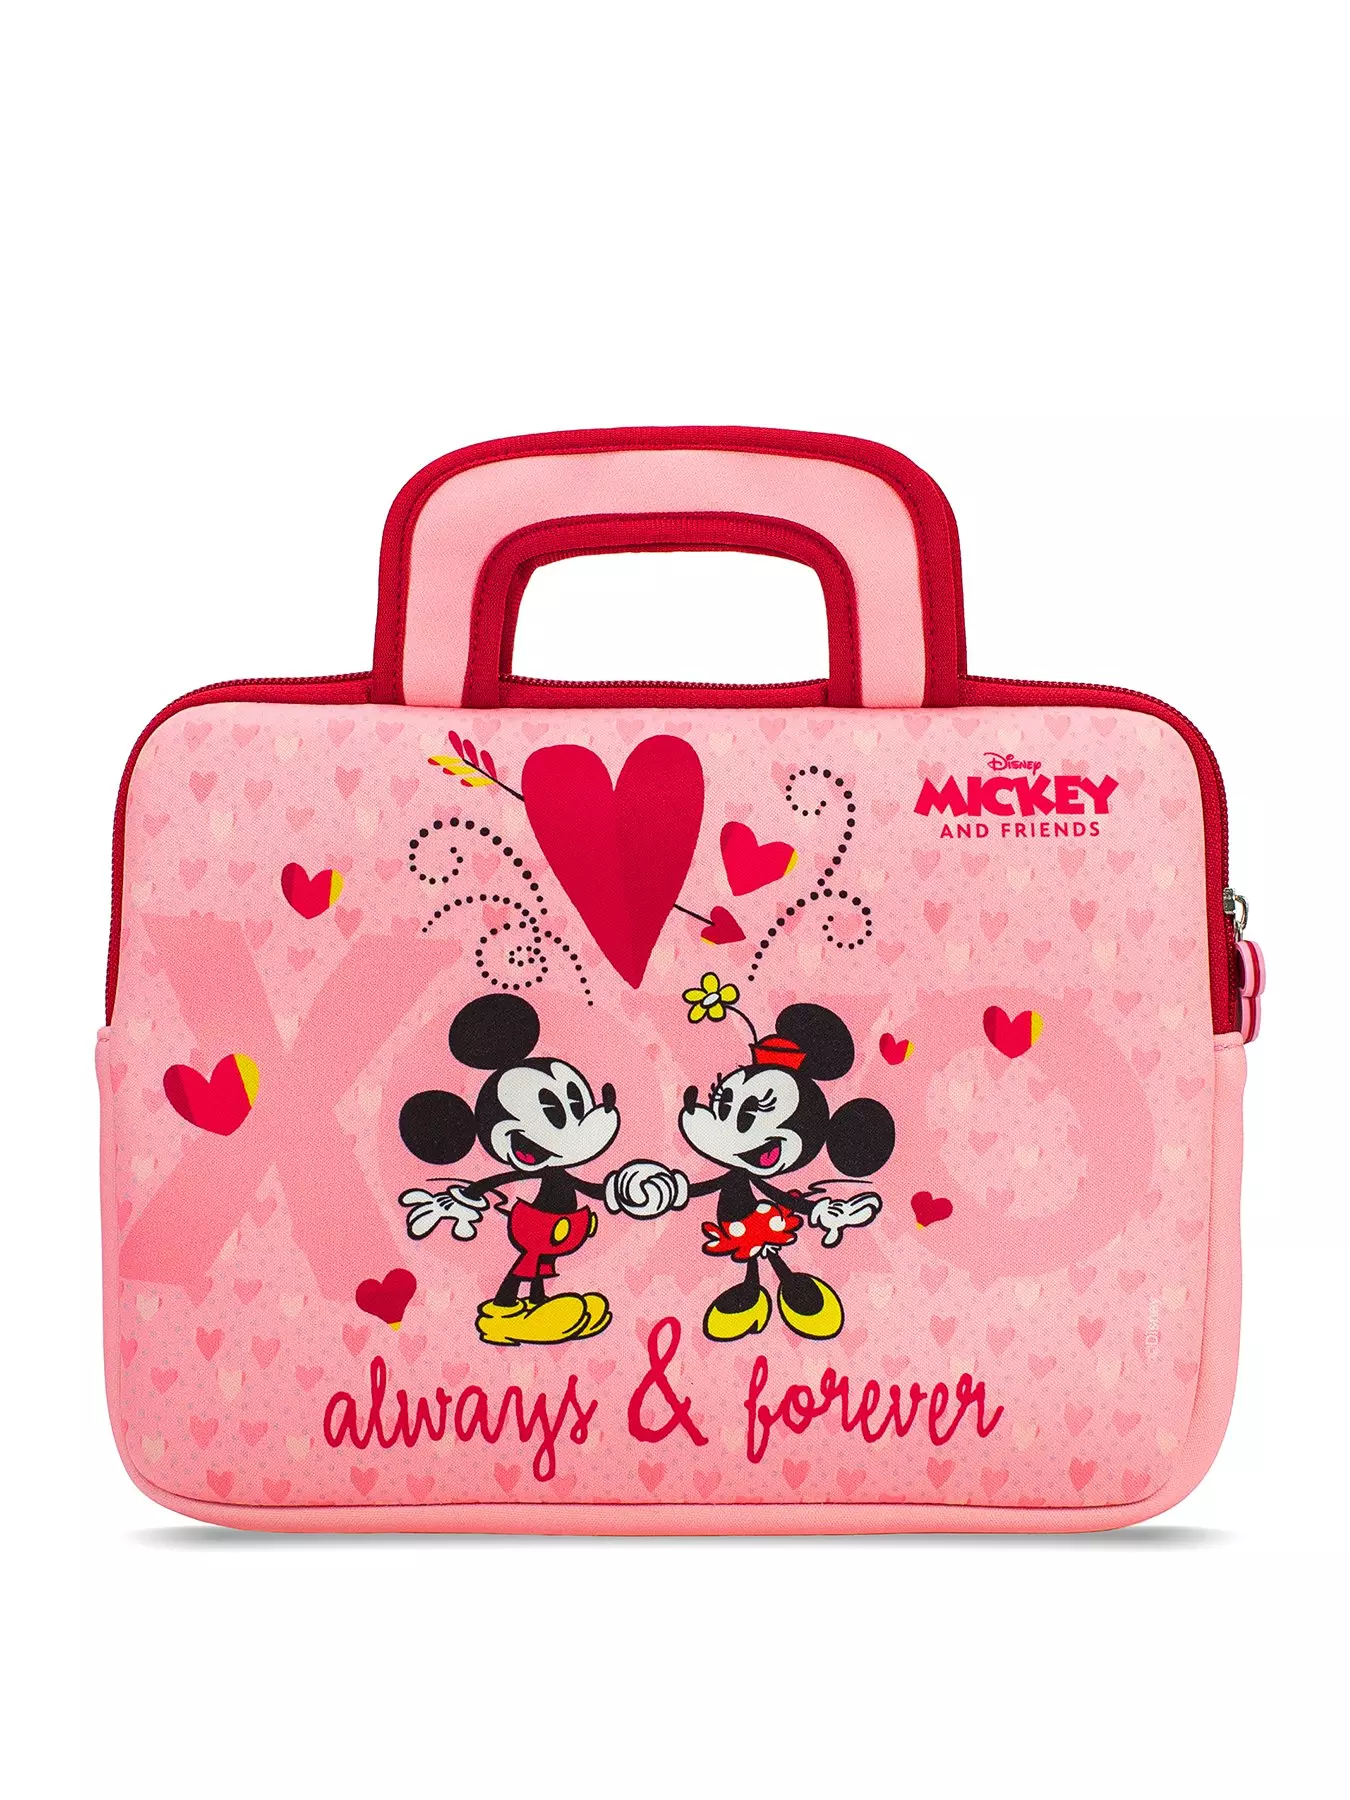 Minnie Mouse Forever Balloon, 16.5in